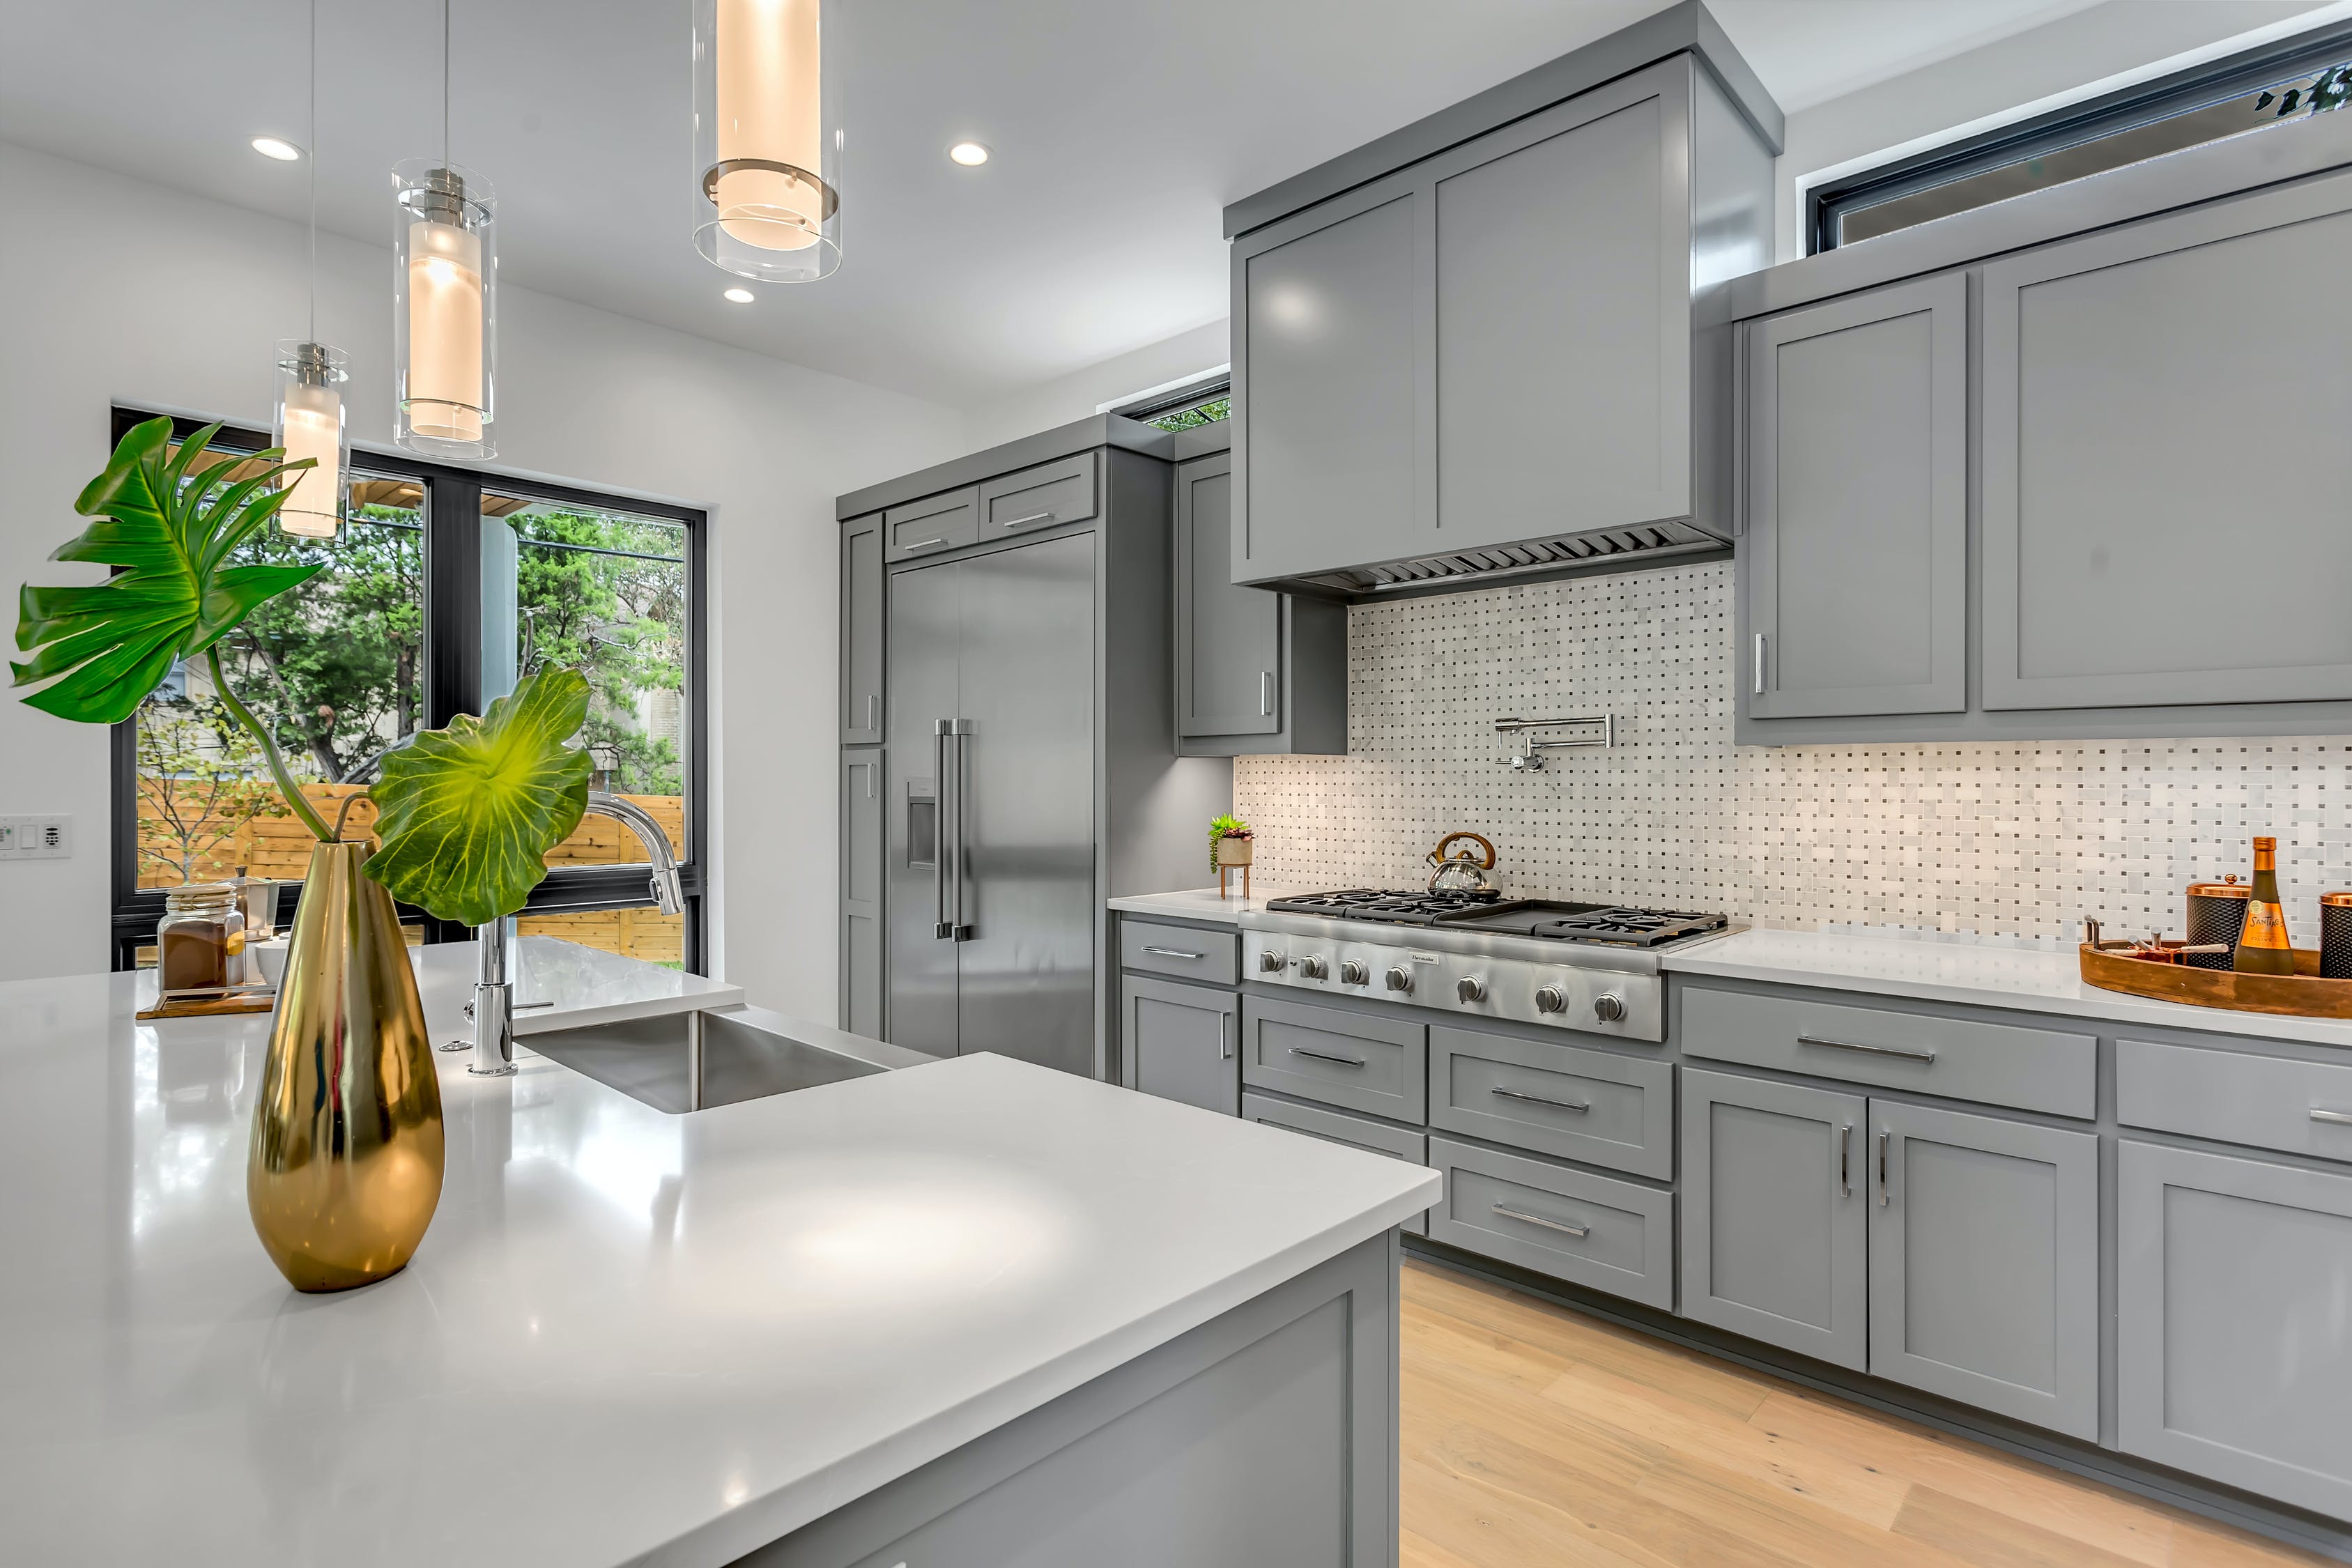 Top reasons why your kitchen designer should also be the renovator